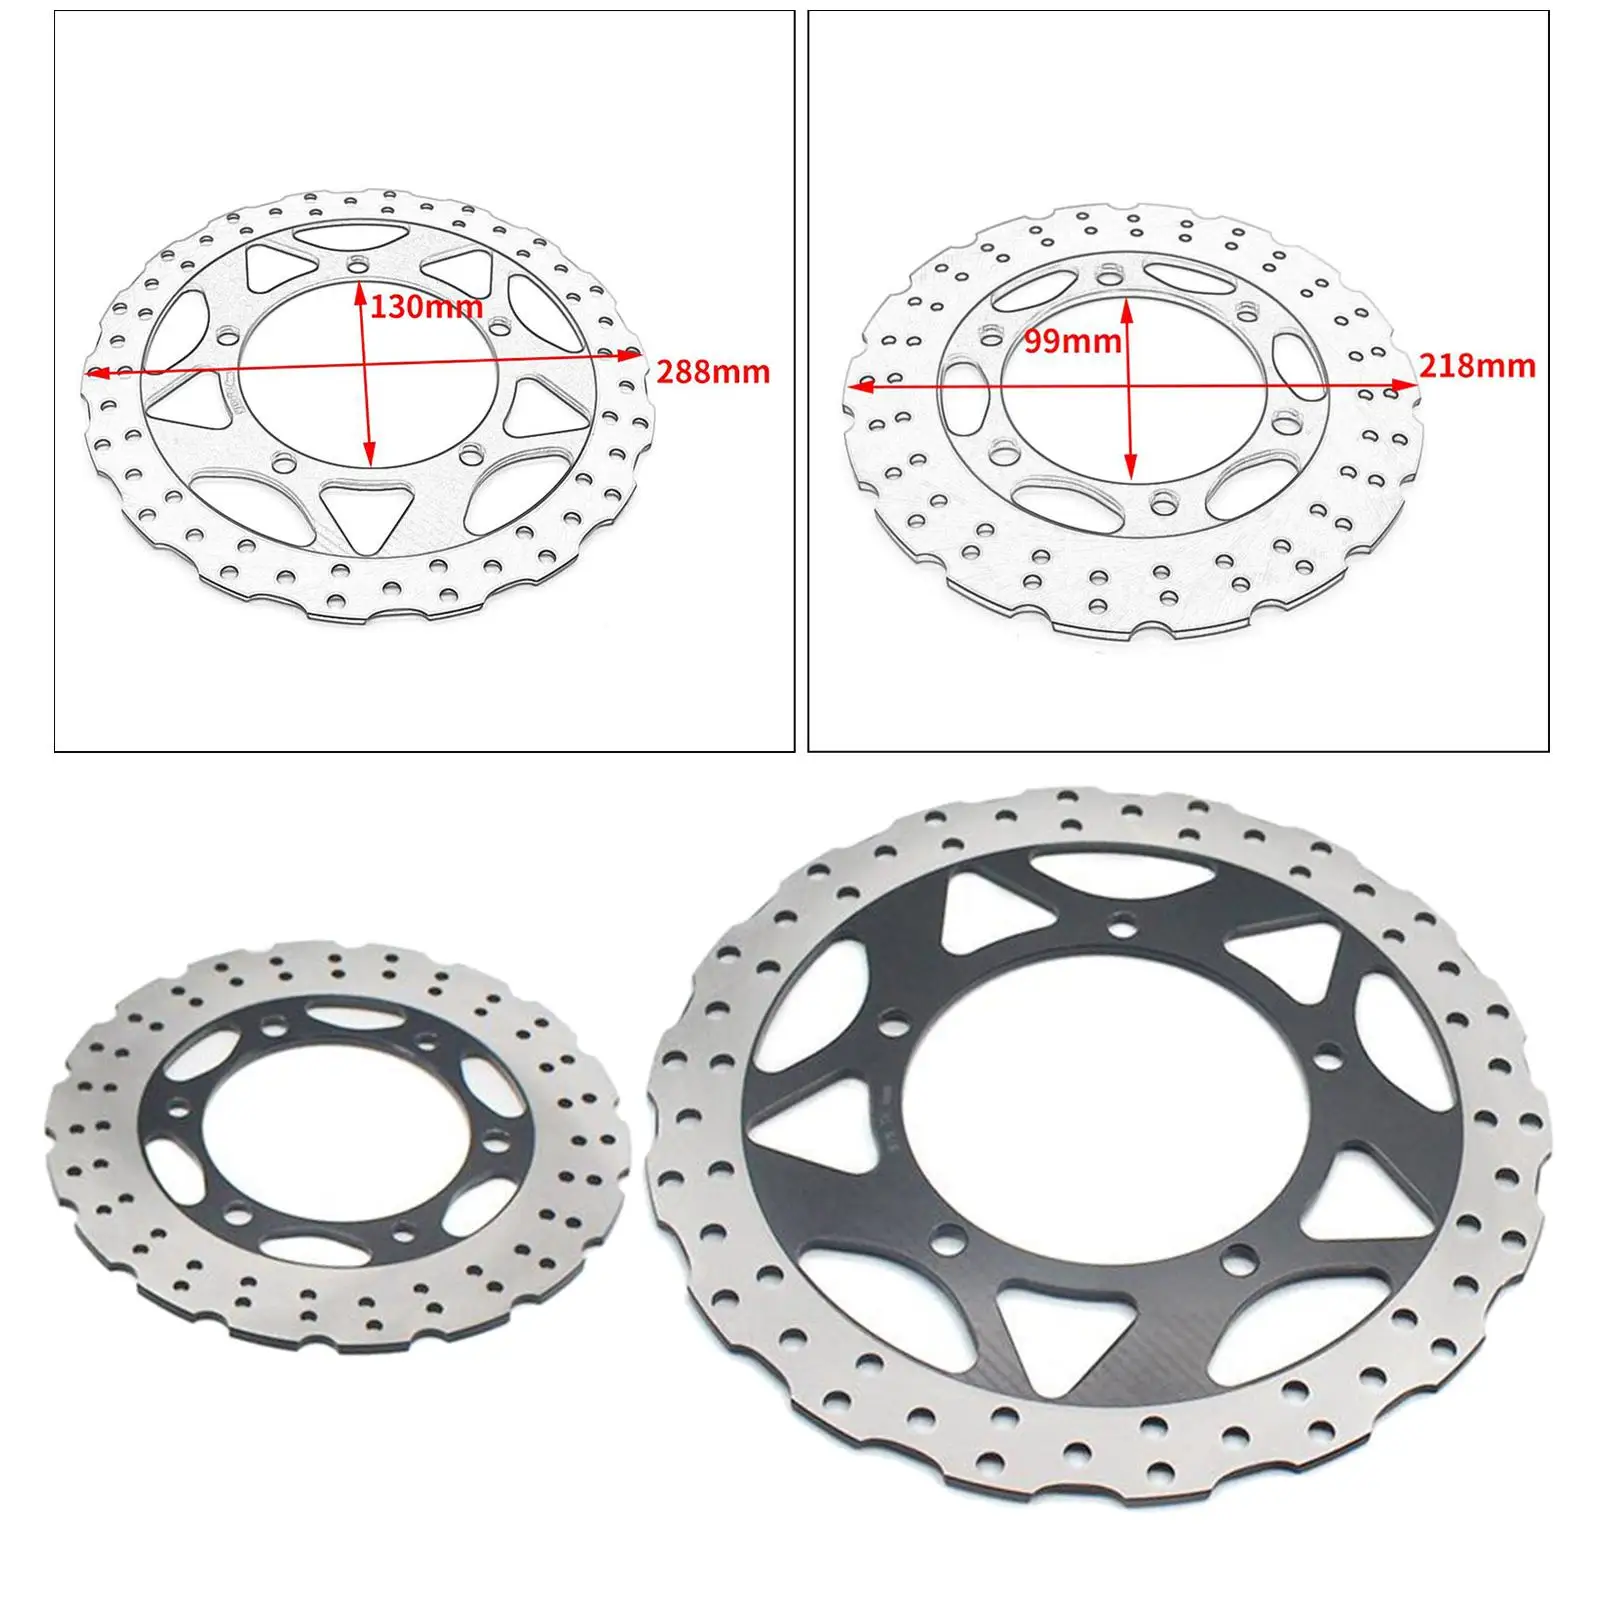 Round Rear Wheel Brake Disc Rotor 00cc  300 (0)  Non- 2013-up - Meet The Quality Standards,  Tested before Shipment